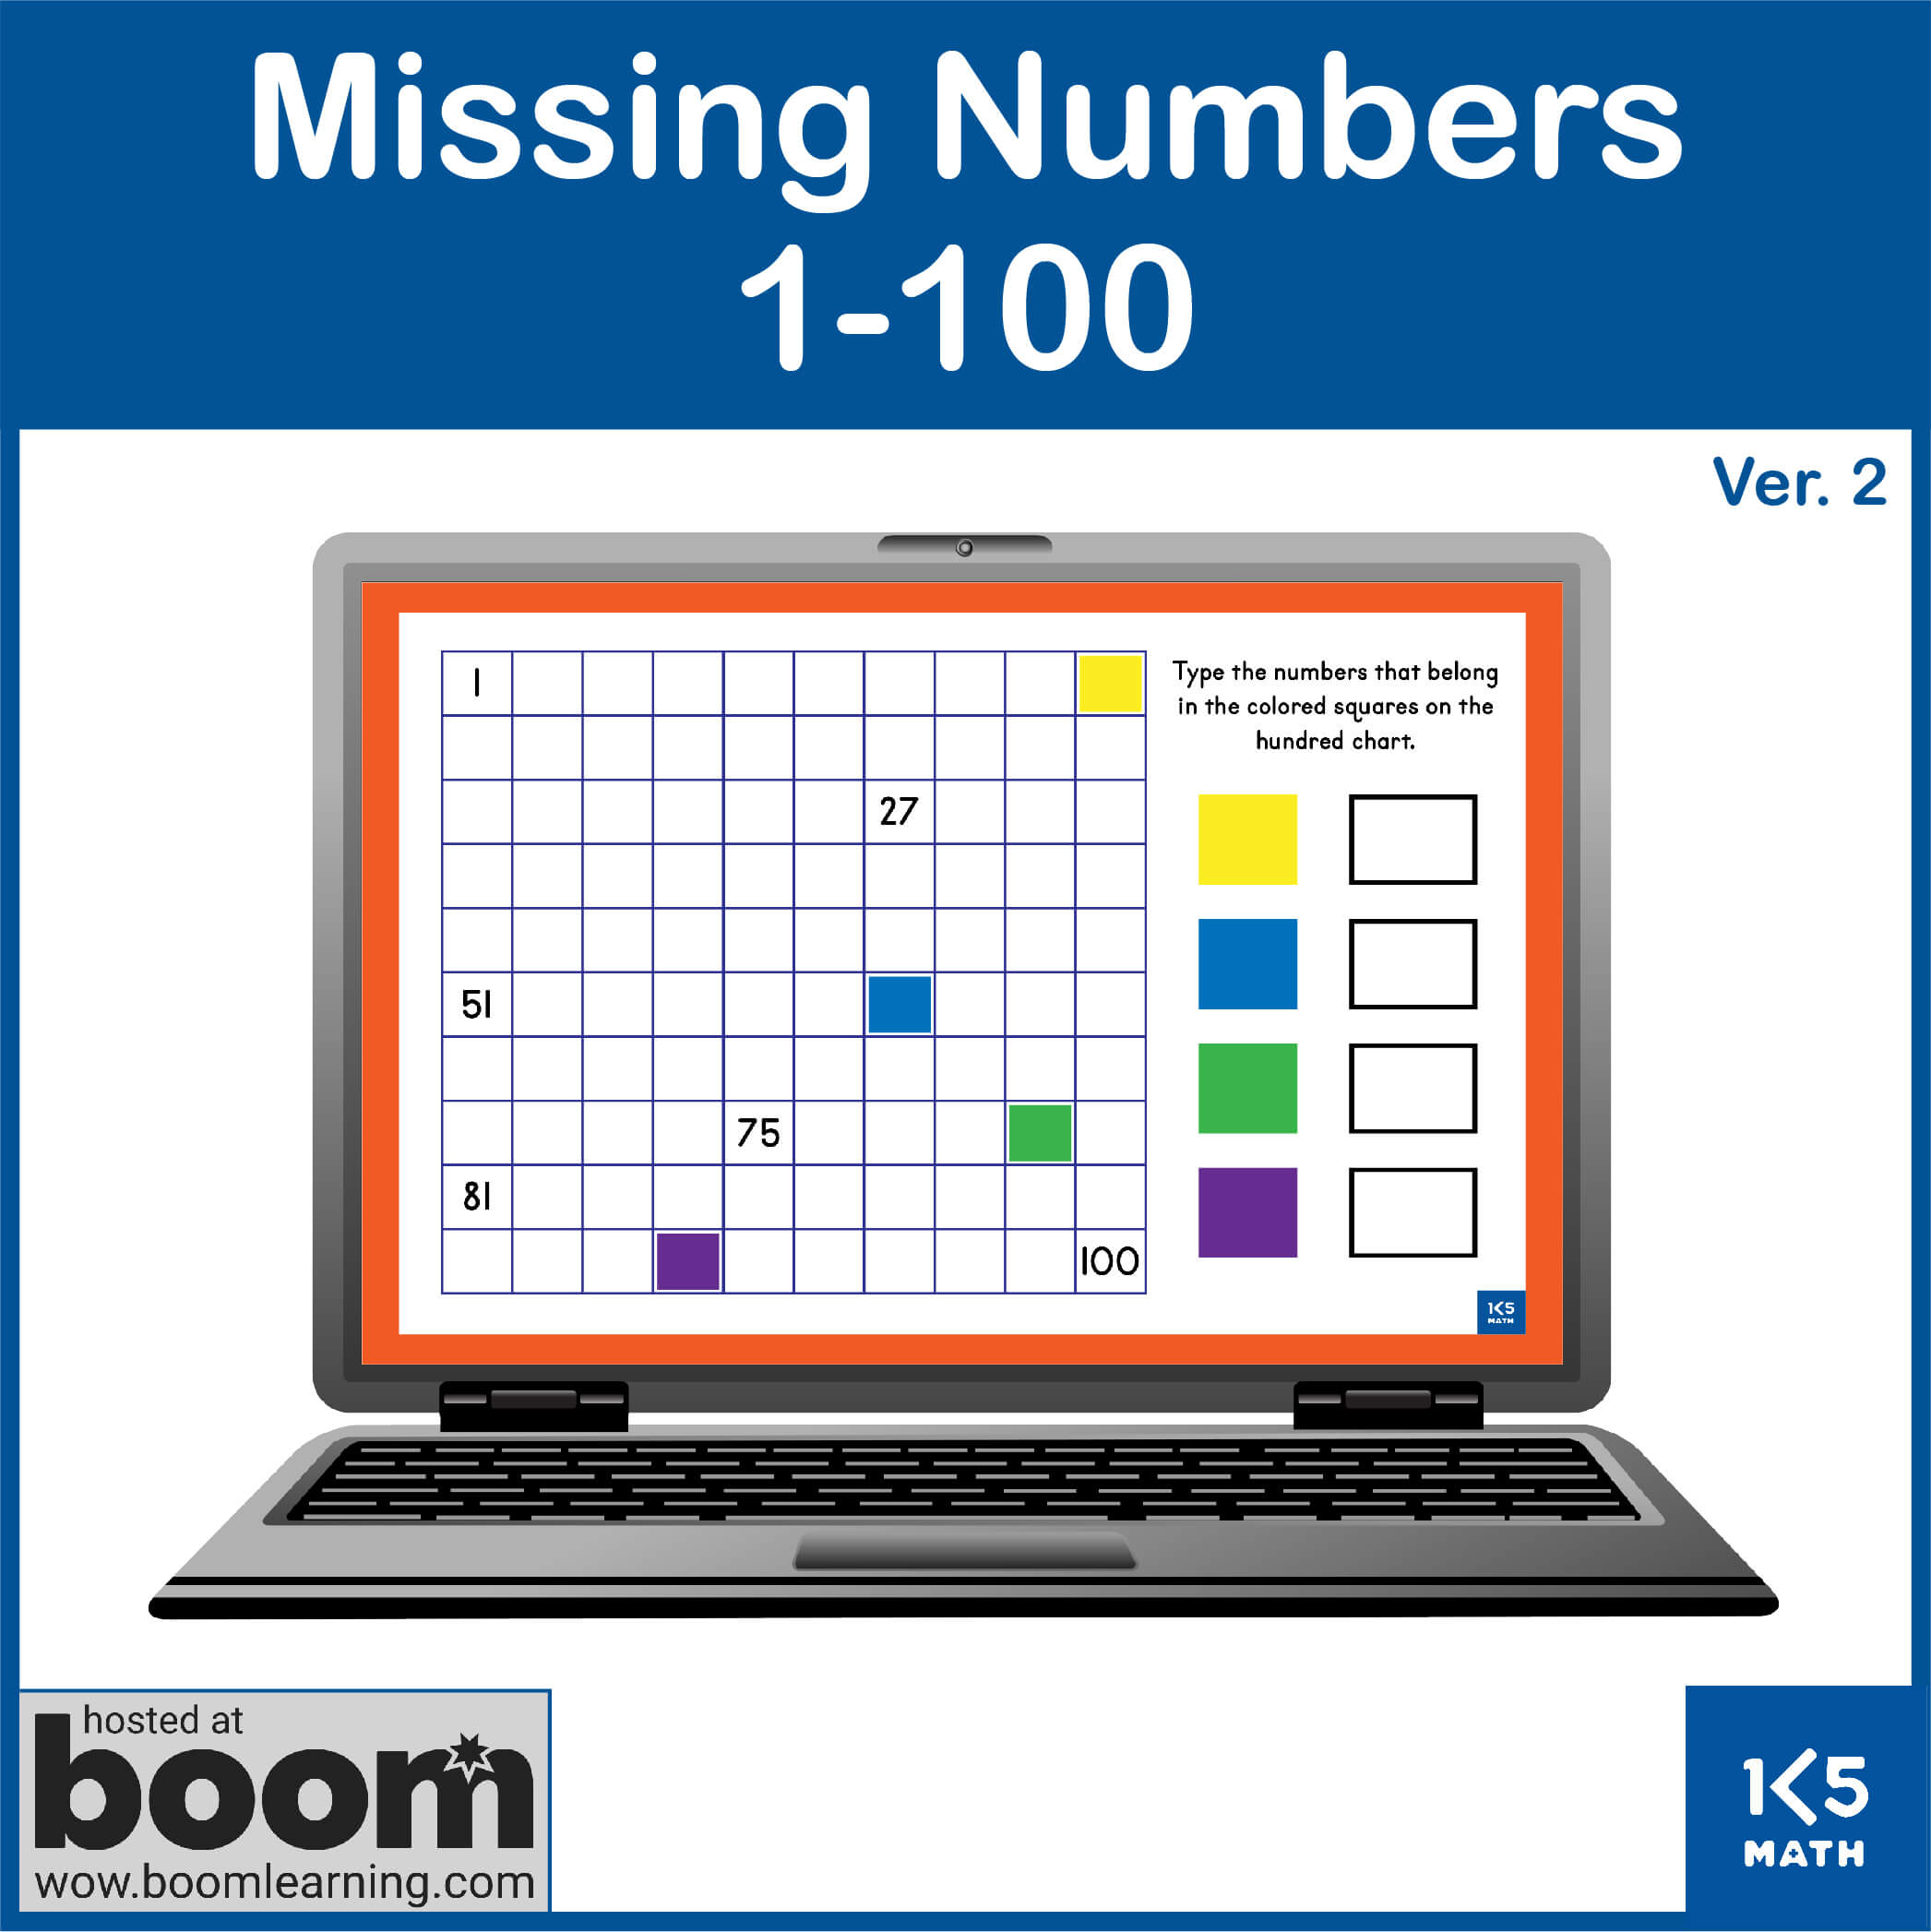 Boom Cards: Missing Numbers 1-100 Ver.2